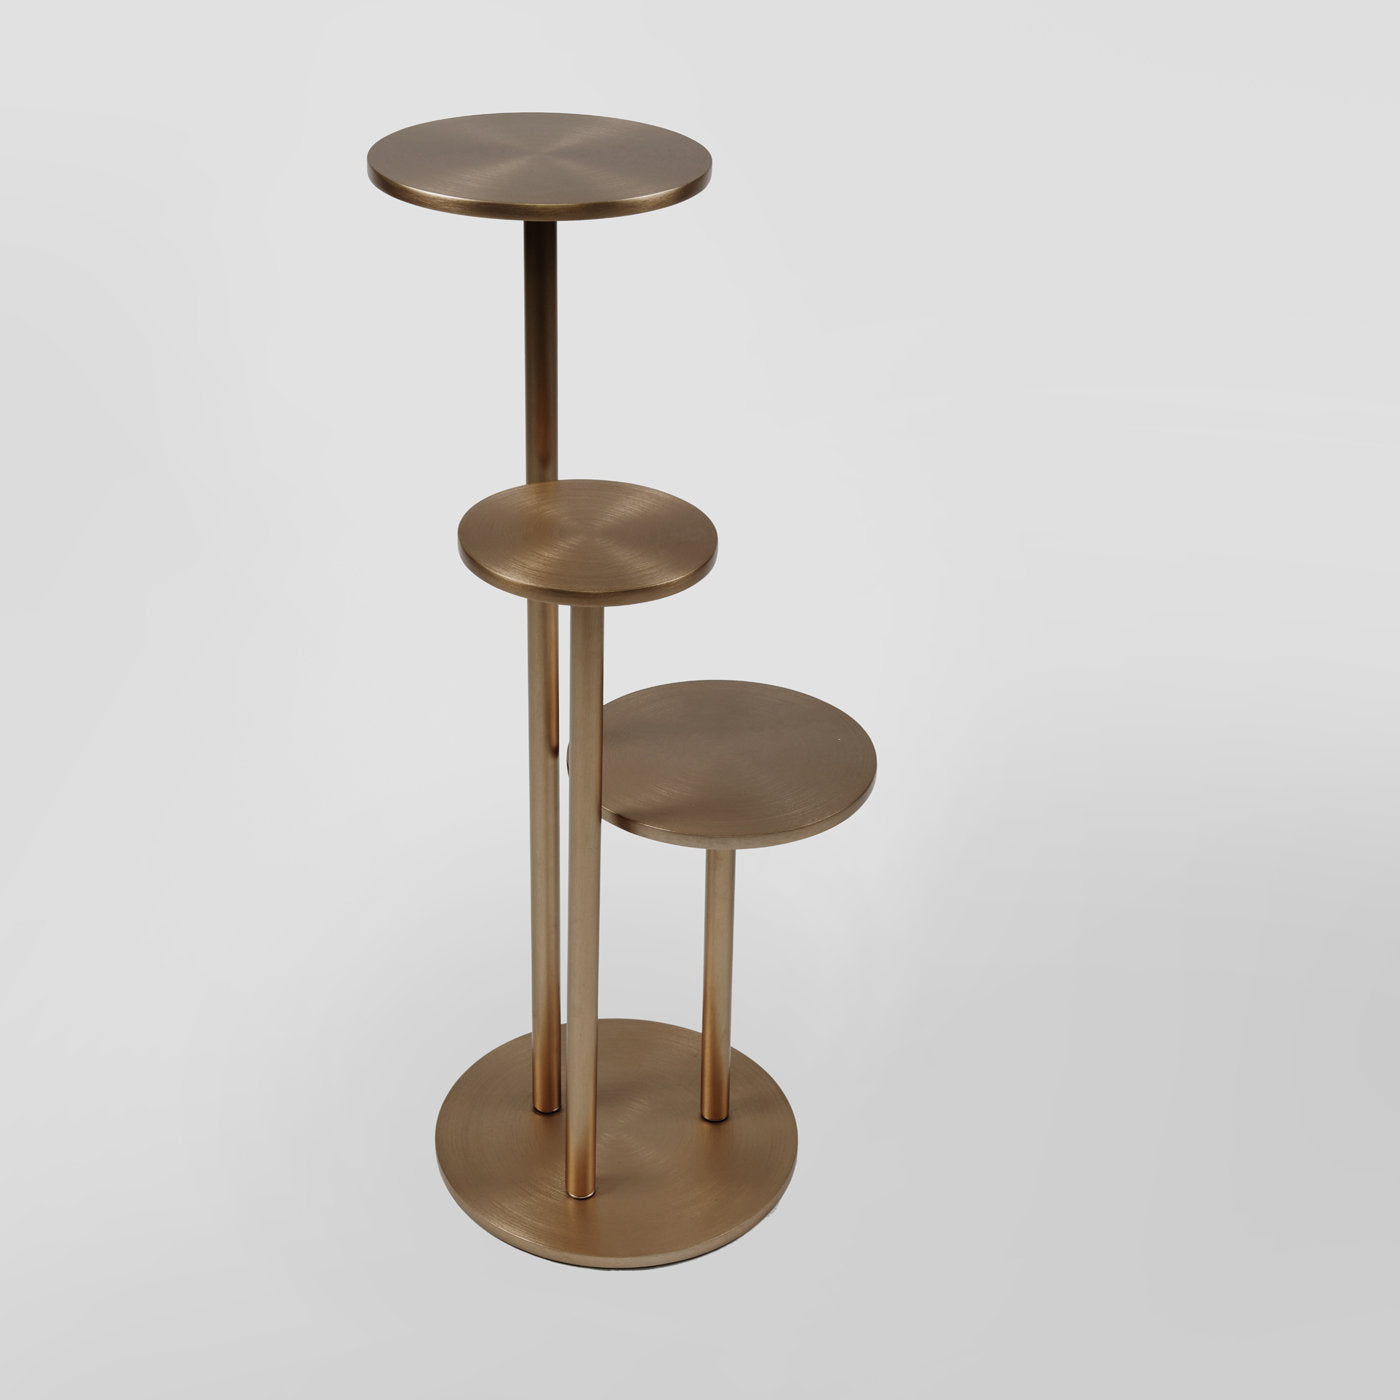 Orion Side Table in Bronze - Alternative view 1